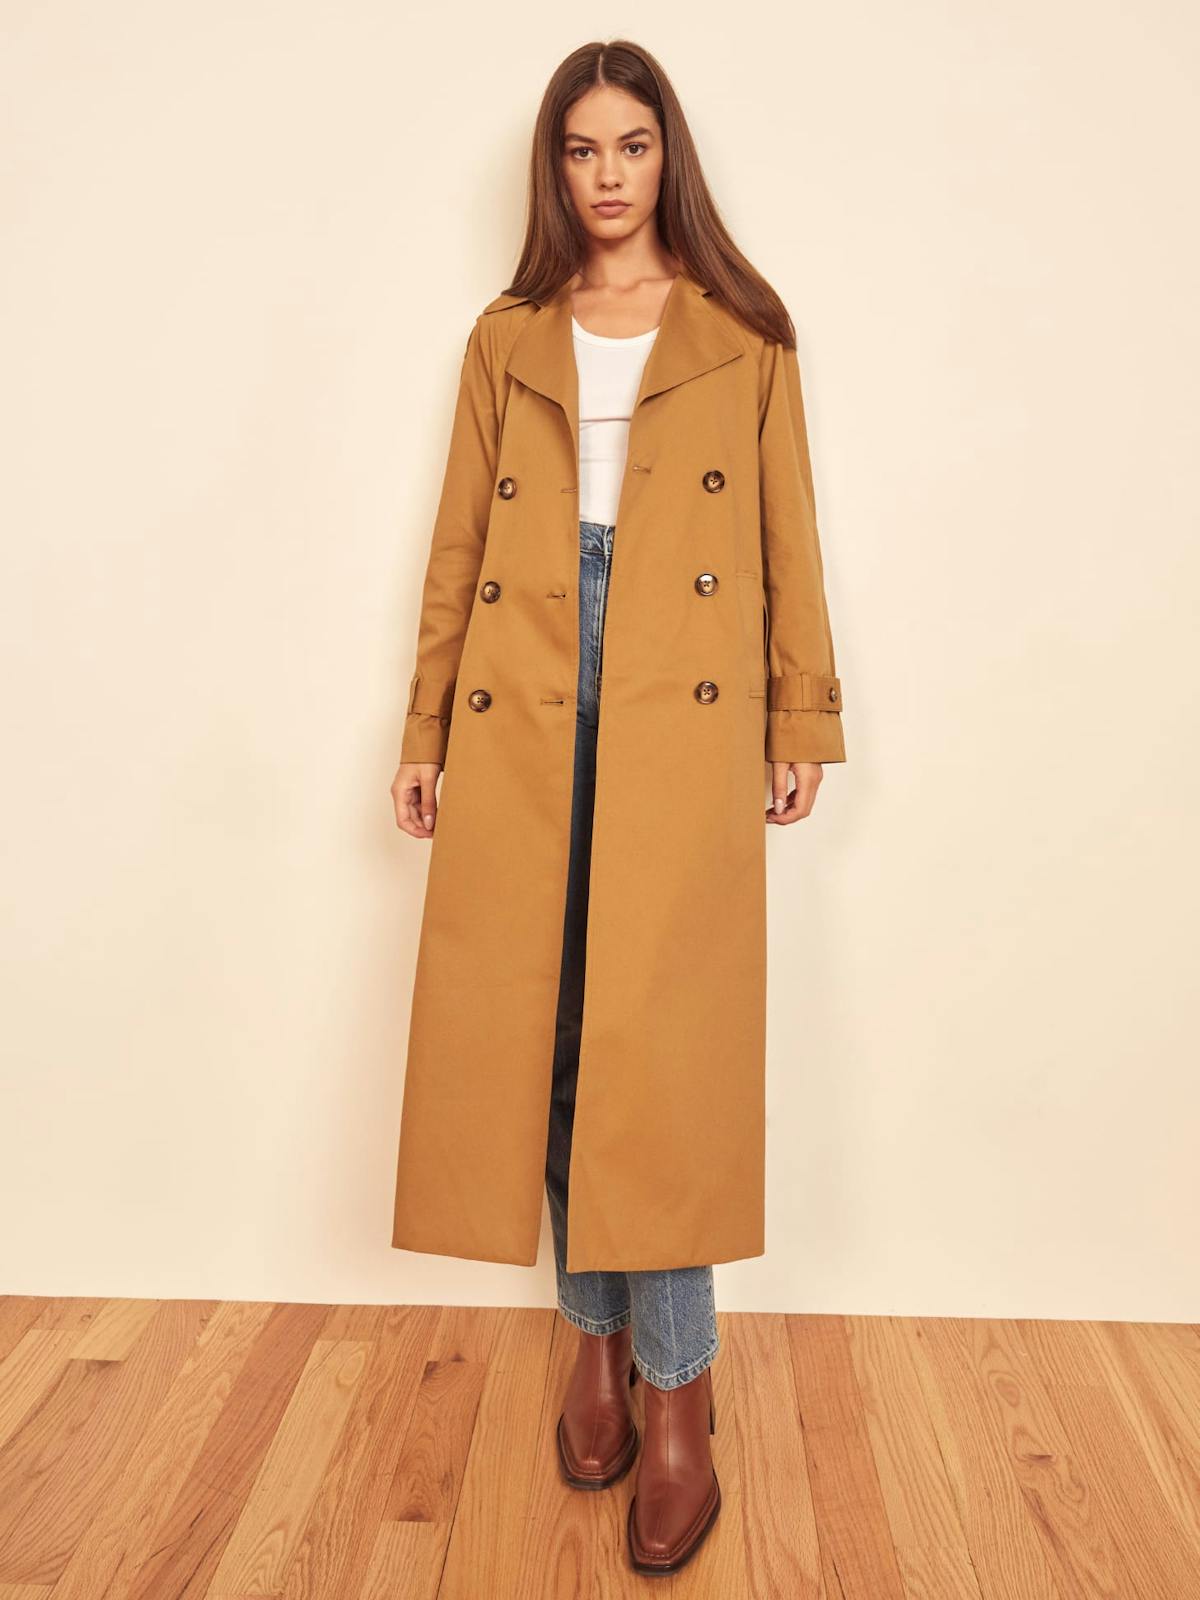 11 best women's trench coats for spring 2022